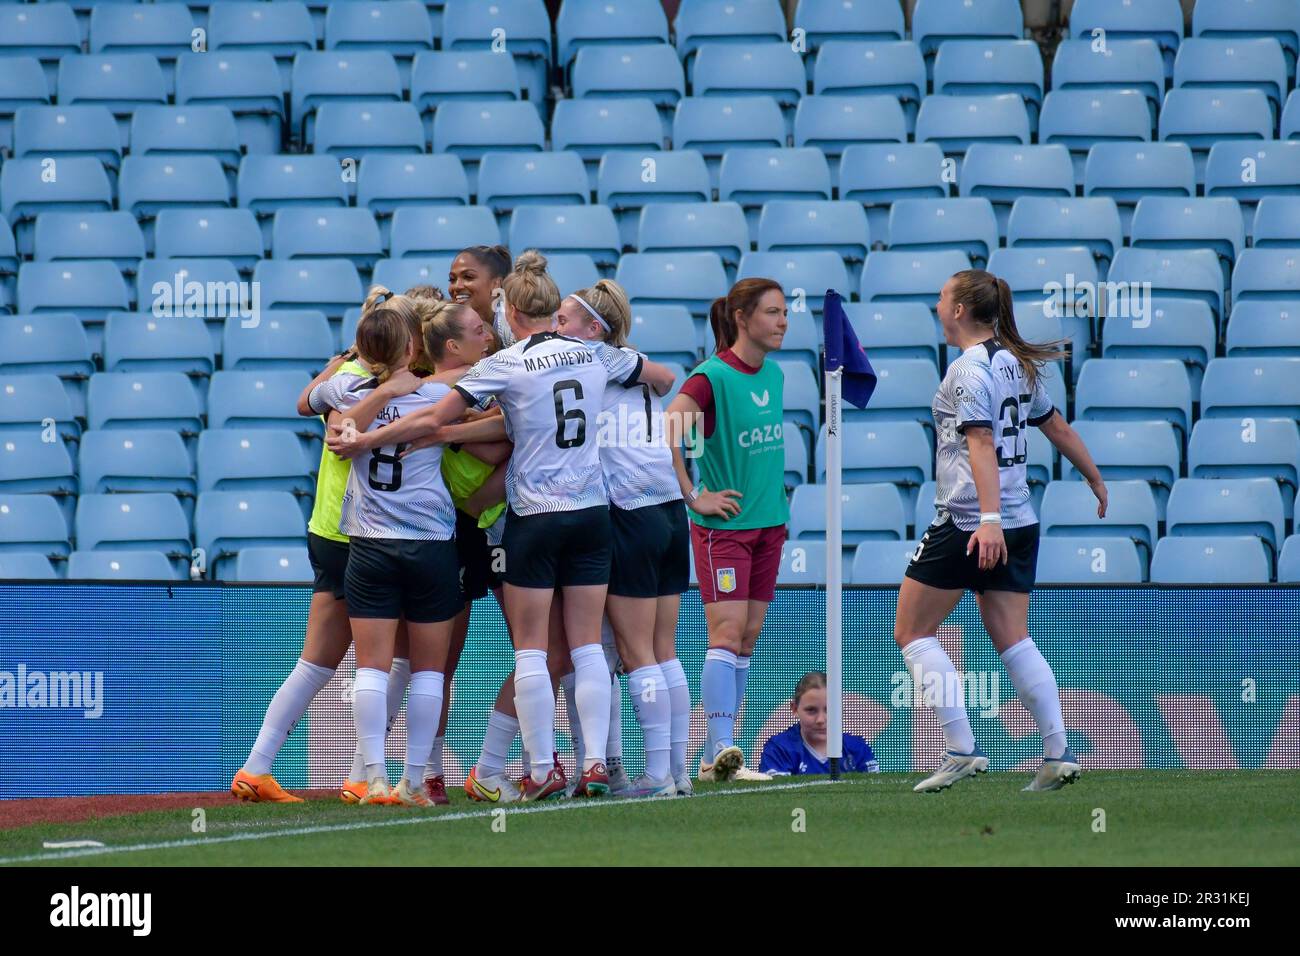 Birmingham, England. 21 May 2023. Liverpool players celebrate their side's second goal during the Barclays Women's Super League game between Aston Villa and Liverpool at Villa Park in Birmingham, England, UK on 21 May 2023. Credit: Duncan Thomas/Majestic Media/Alamy Live News. Stock Photo